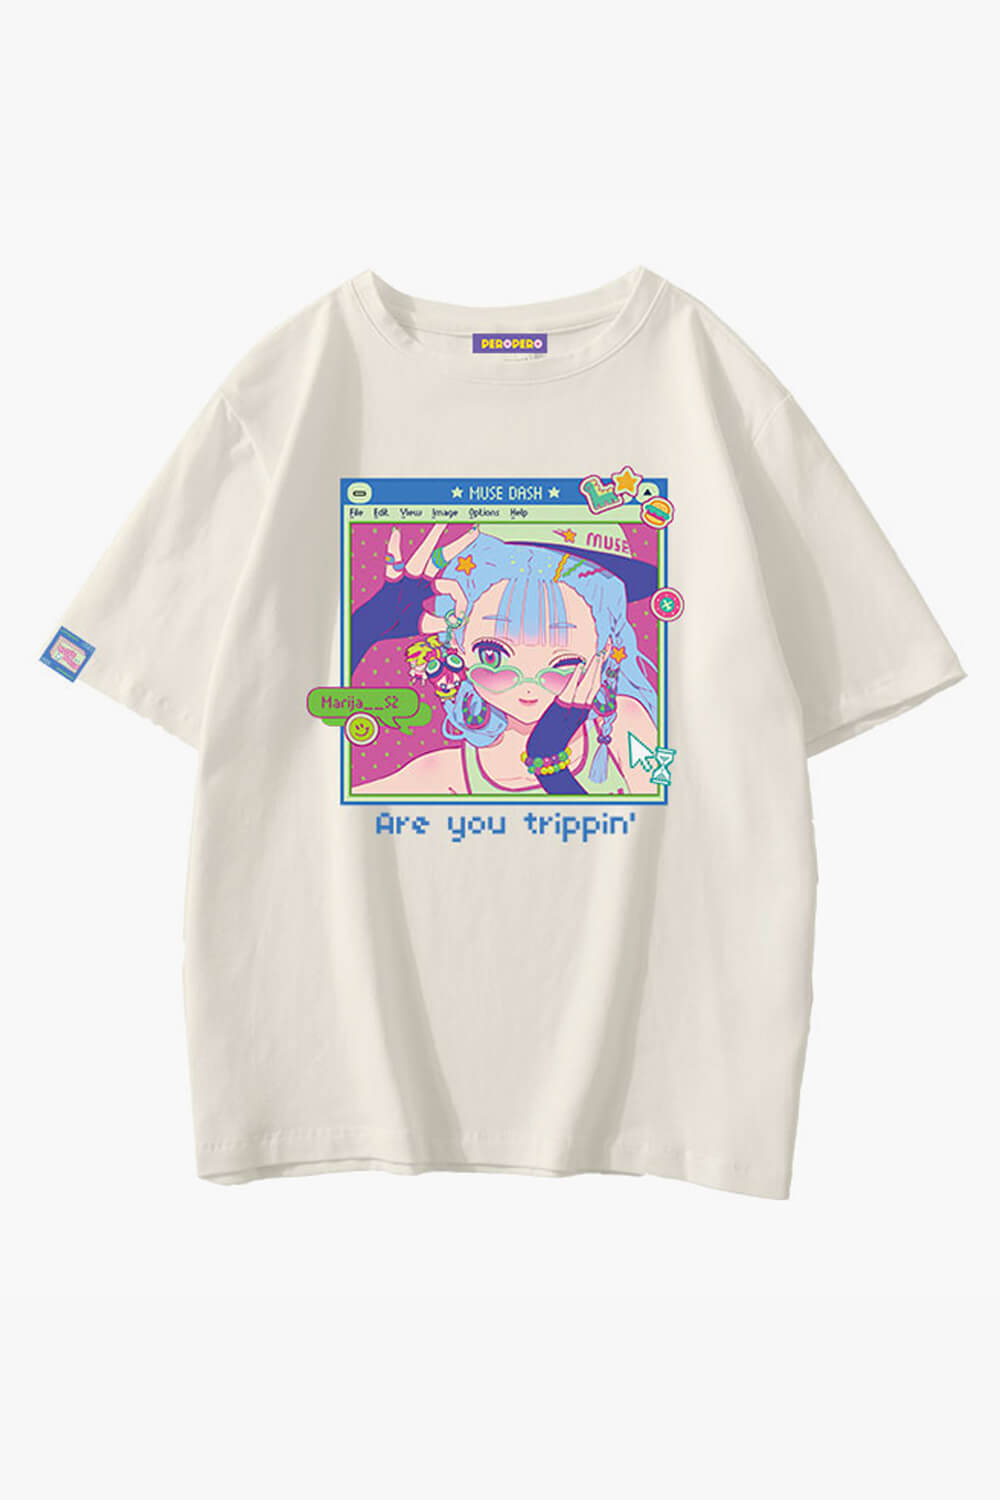 Are You Trippin Anime T-Shirt Webcore Aesthetic